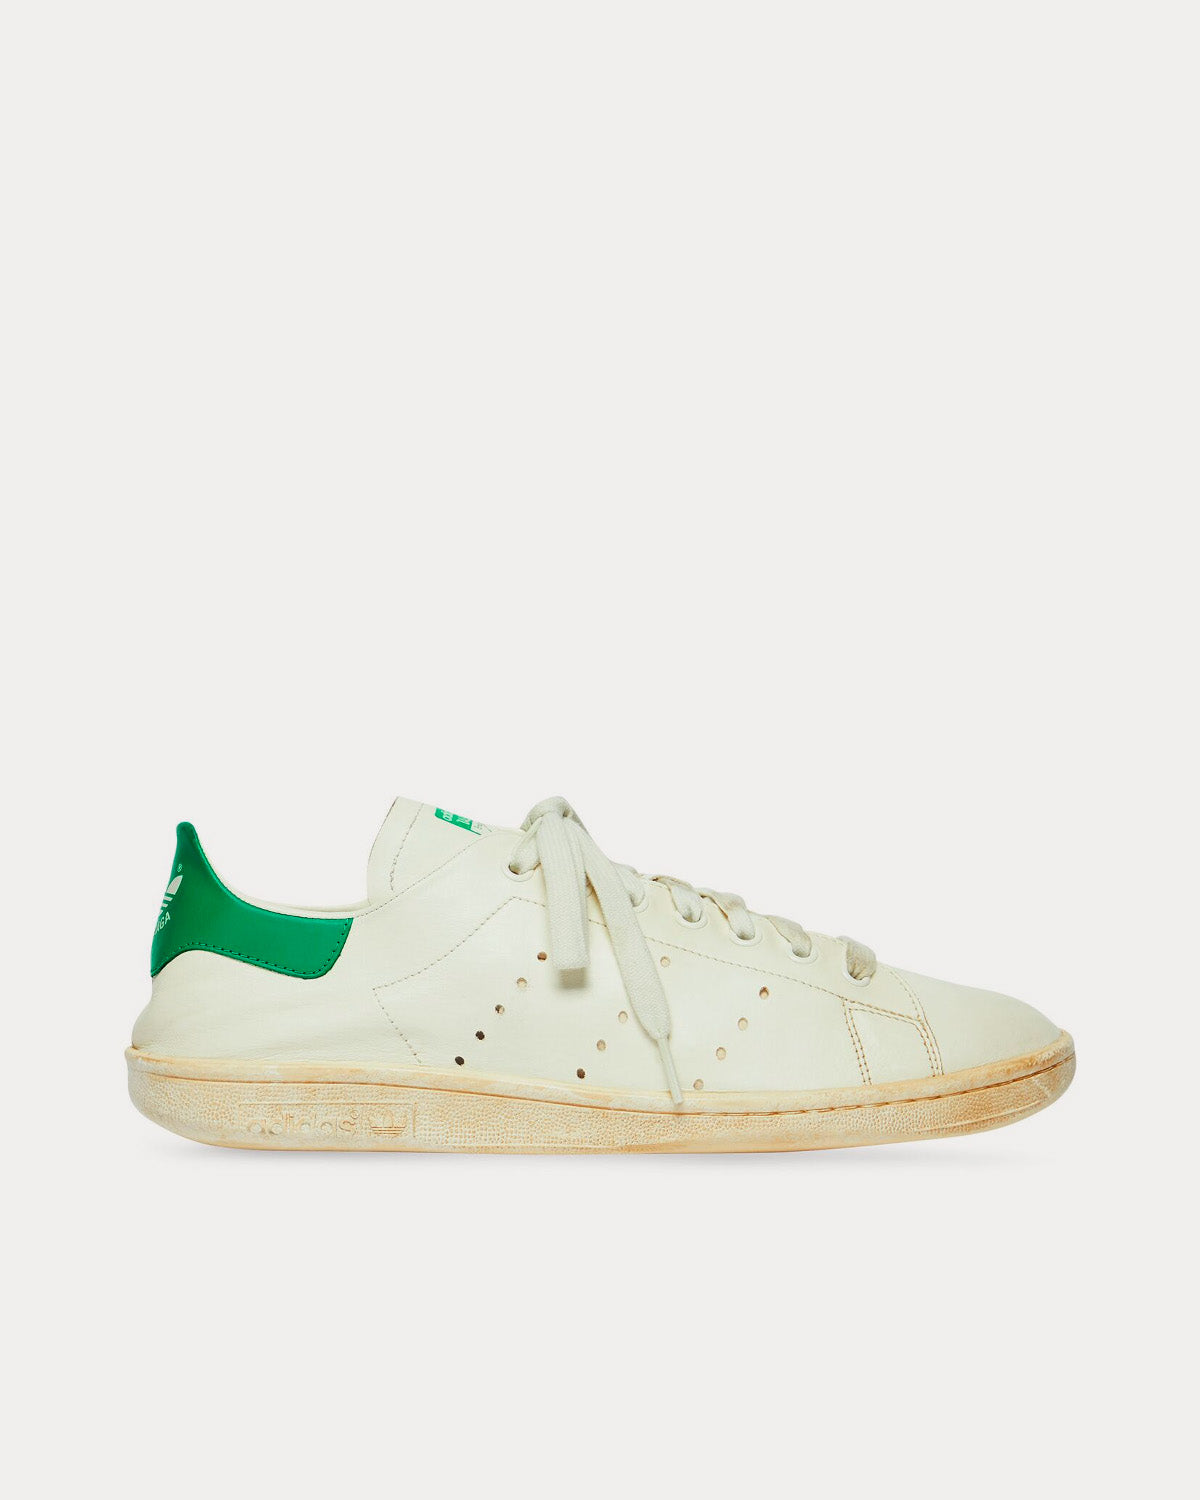 How much? 'Worn out' £645 Adidas Stan Smith trainers sell out at Balenciaga, Luxury goods sector